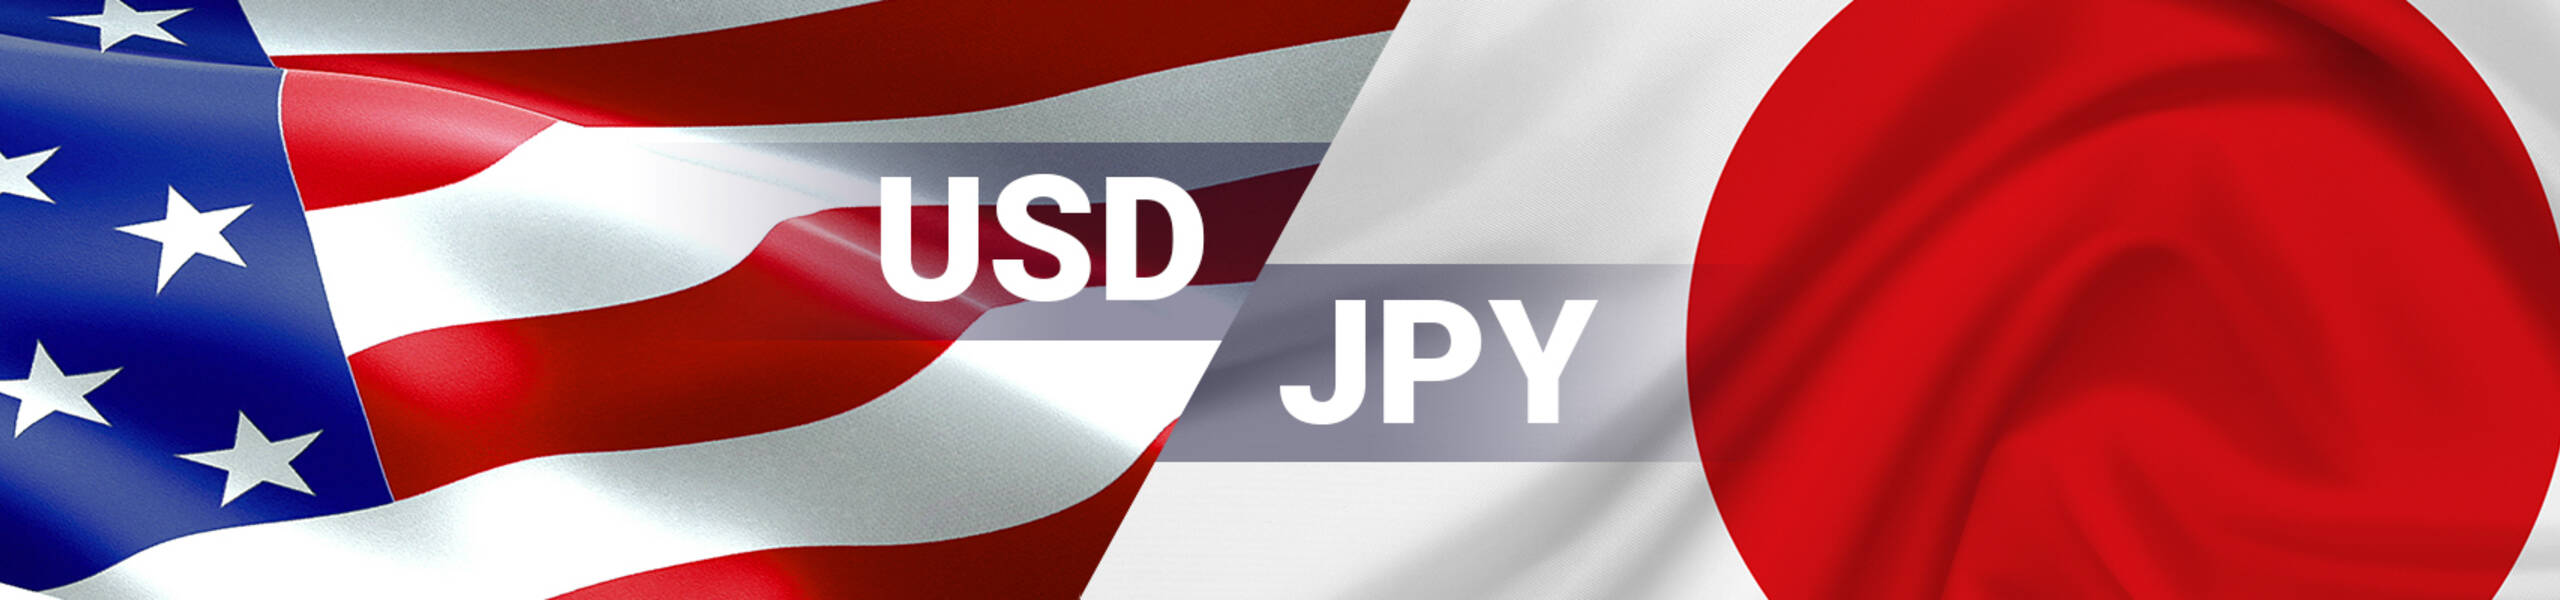 USD/JPY Dailyレポート 2017/08/17